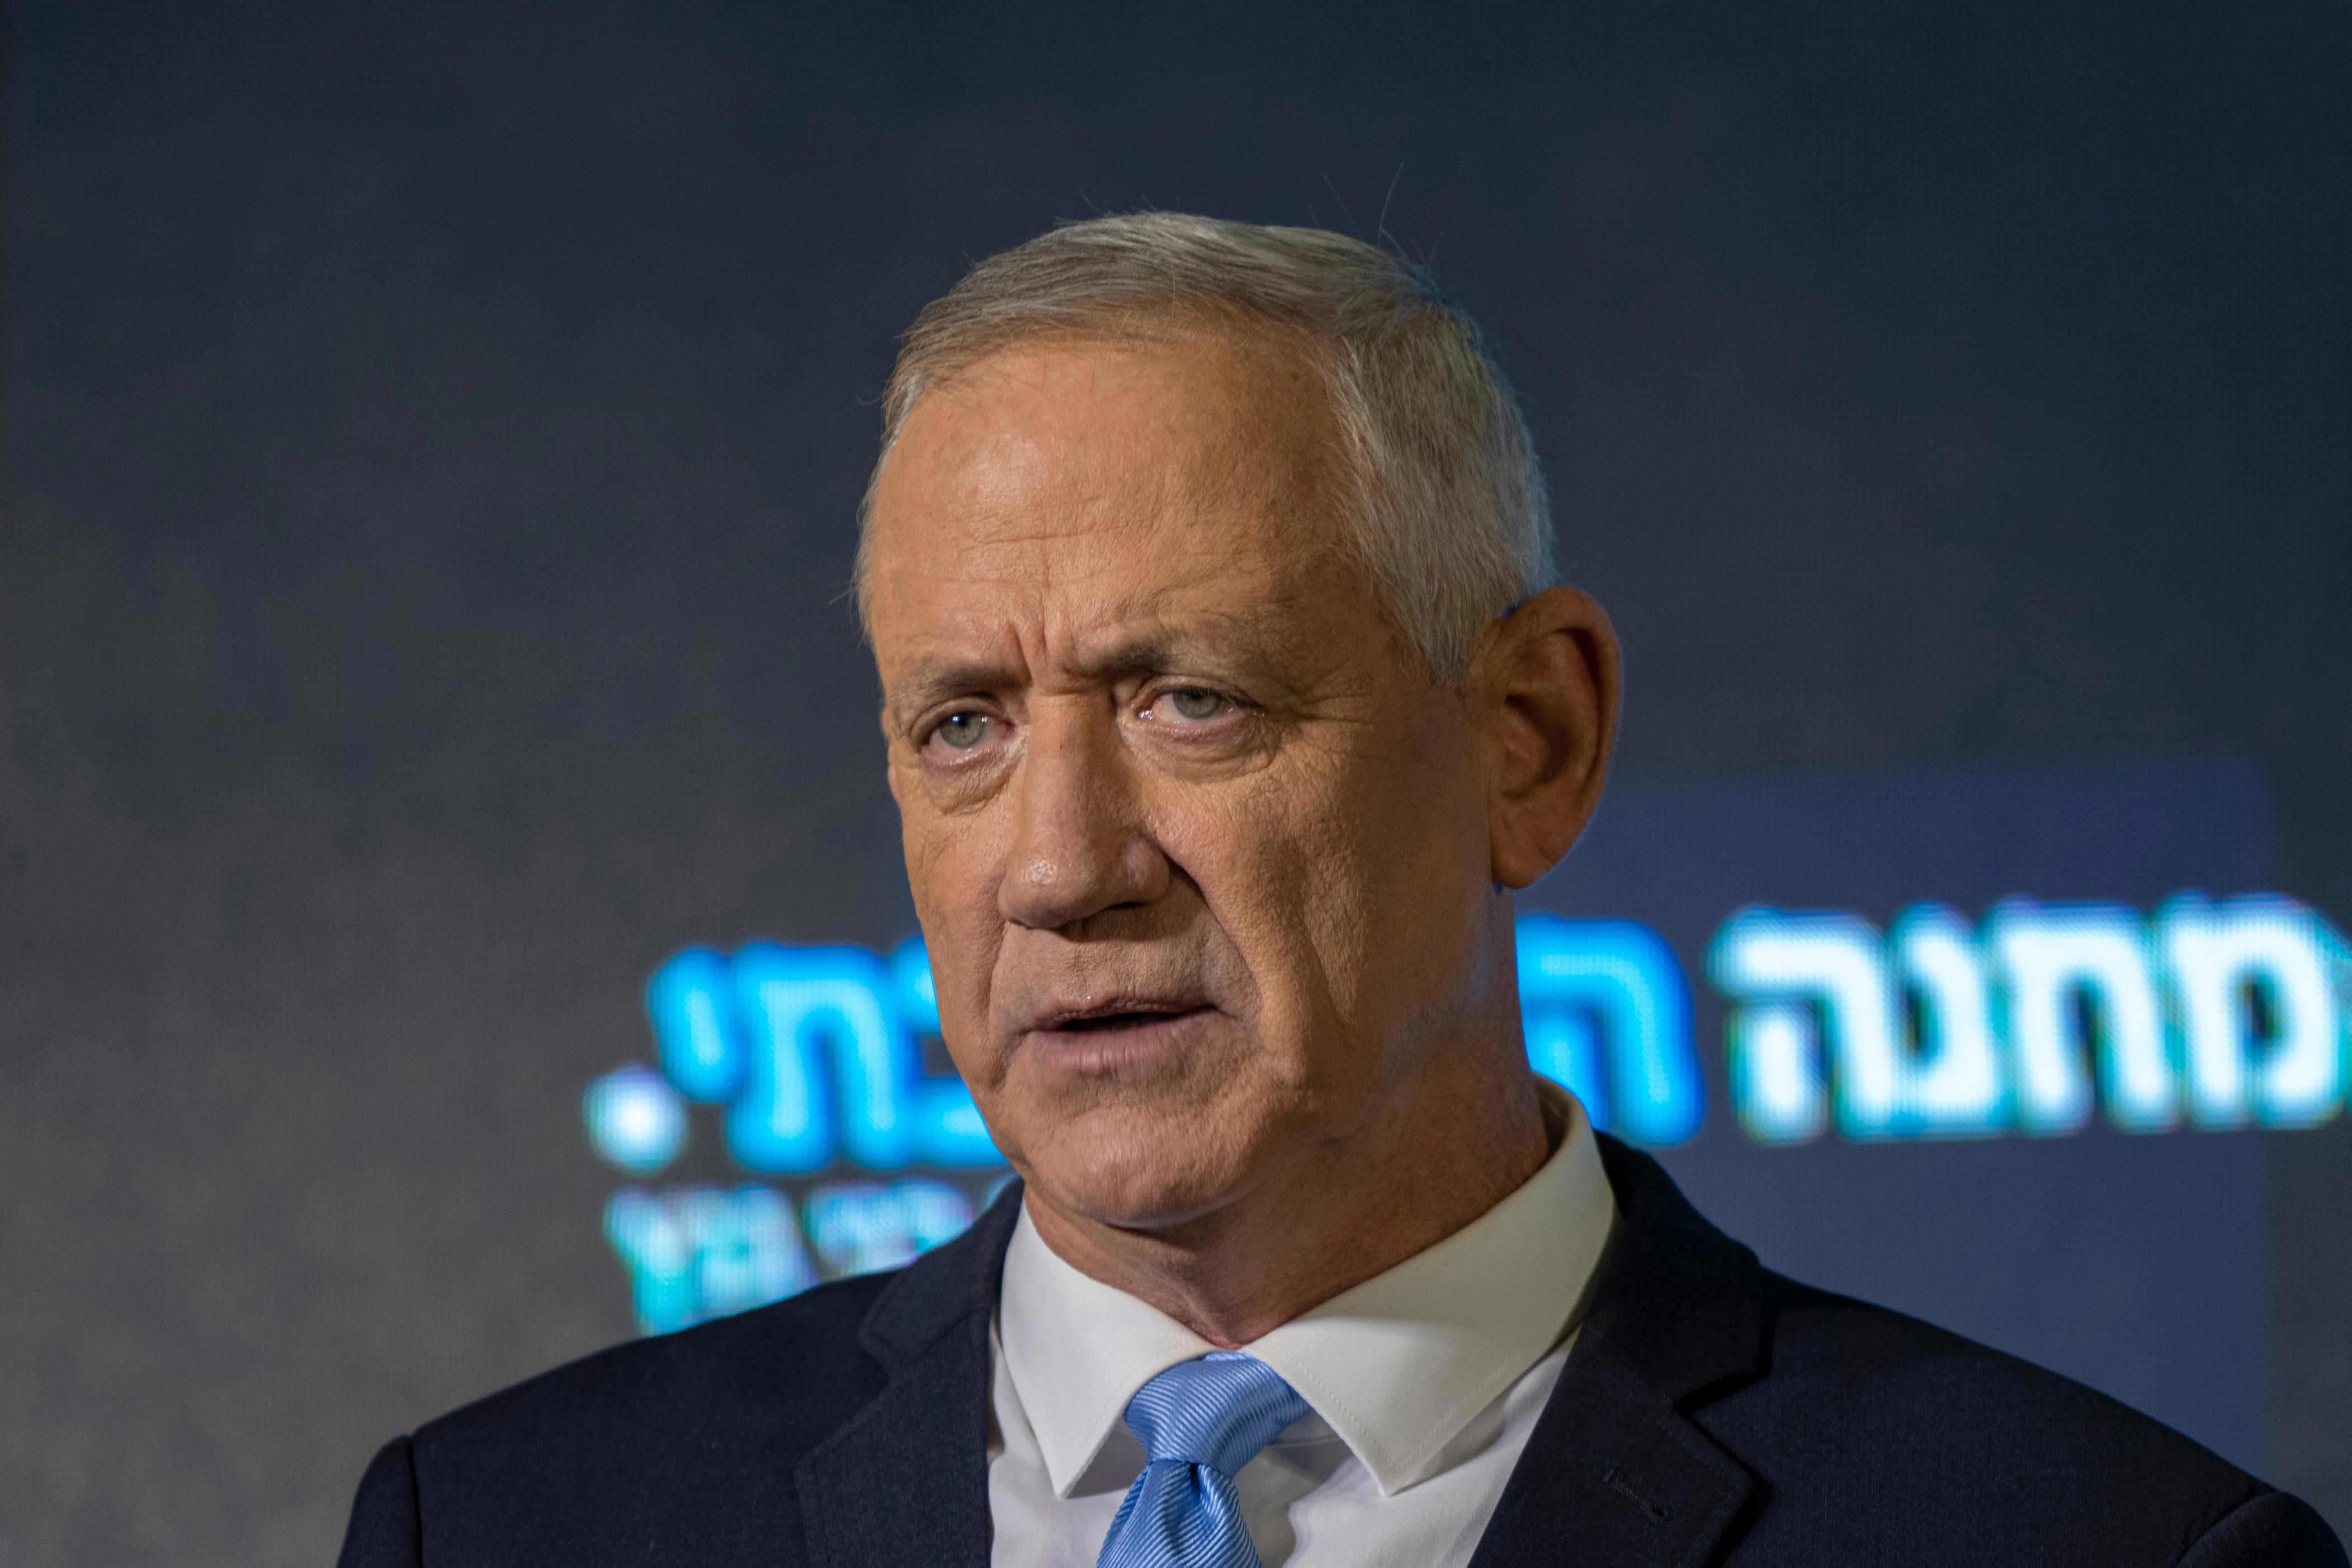 vp harris meets with netanyahu rival in sign of growing white house frustration with israel